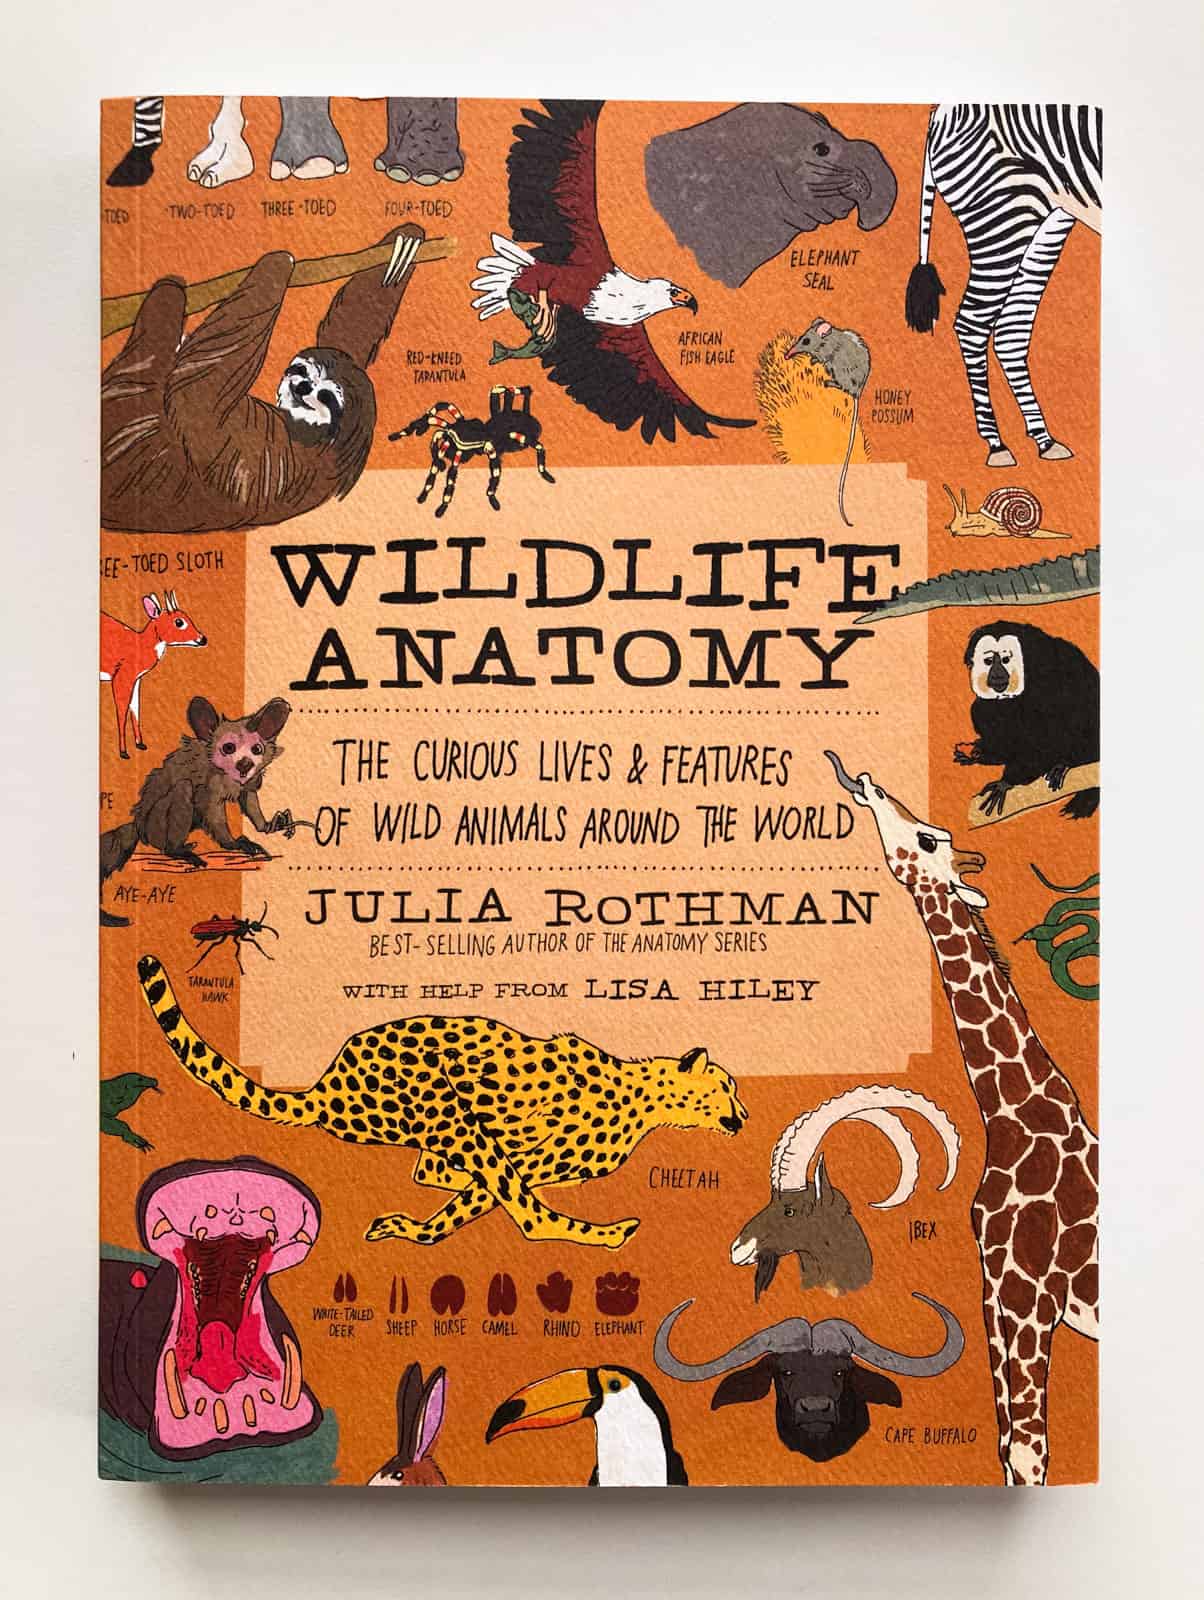 Cover of Wildlife Anatomy: The Curious Lives and Features of Wild Animals Around the World by Julia Rothman with Lisa Hiley